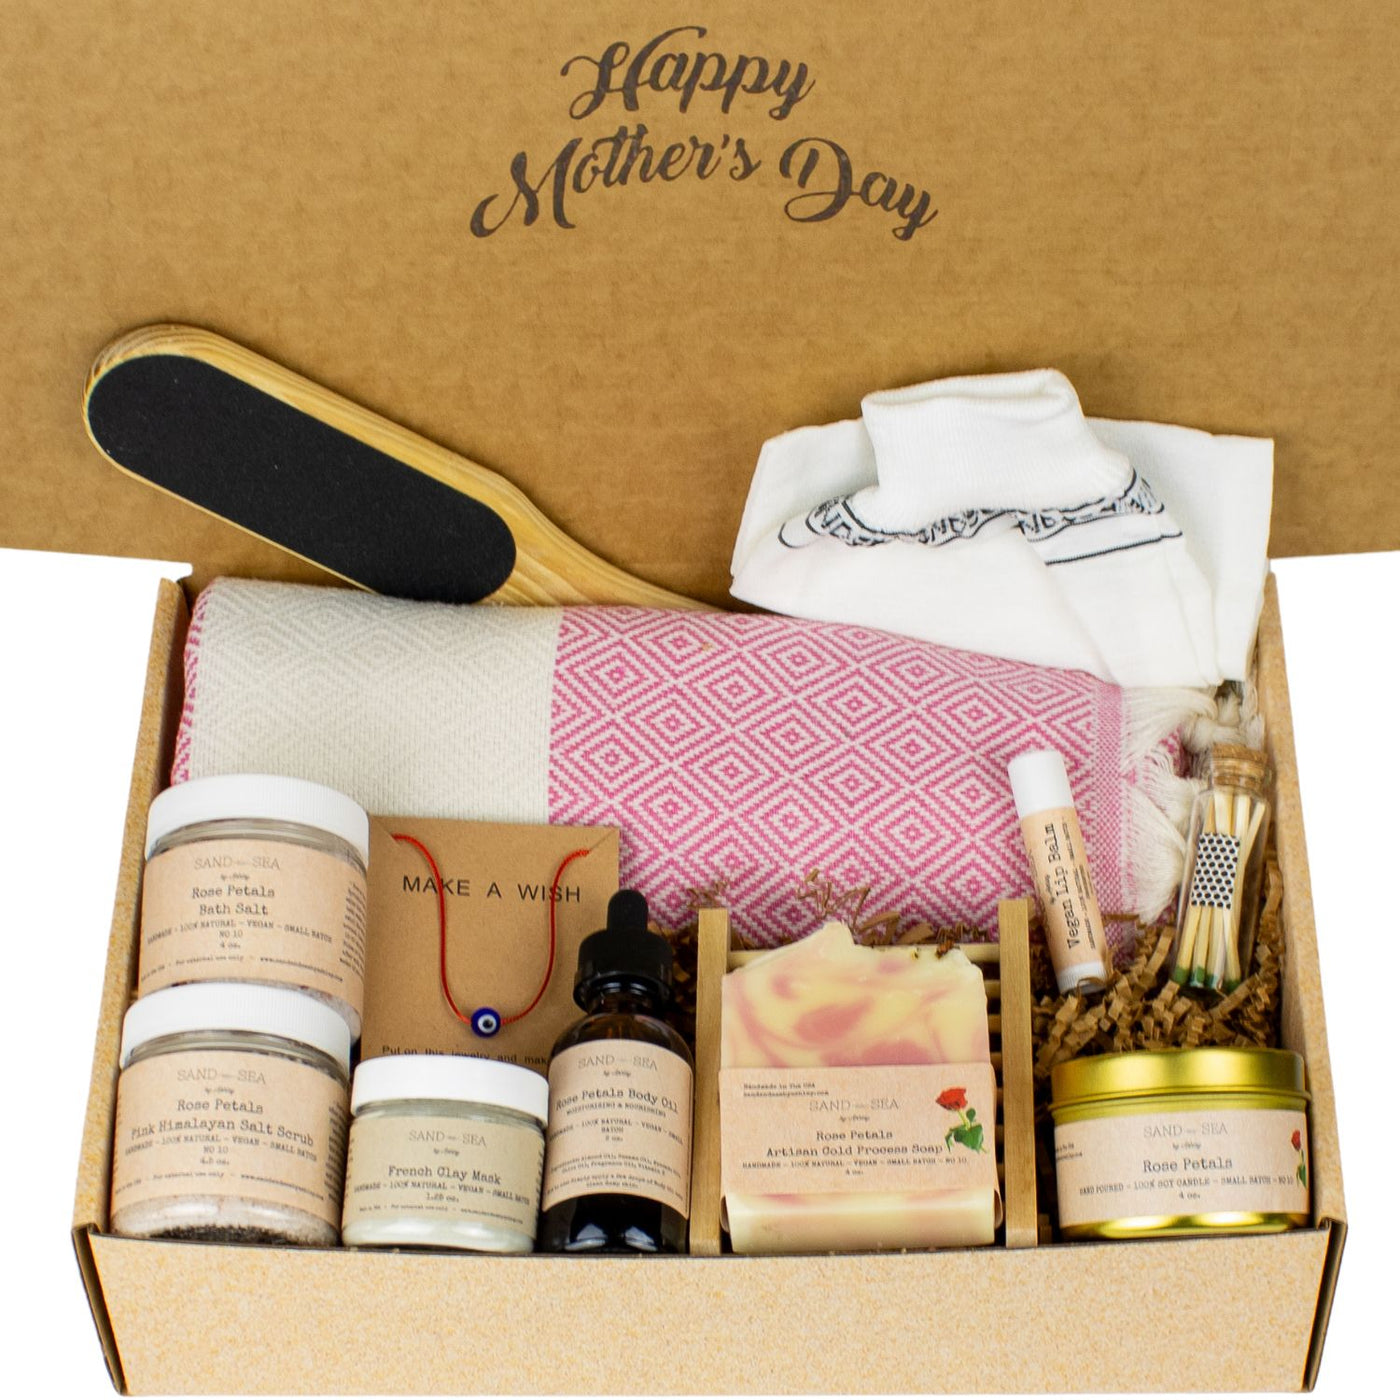 Mother's Day Gifts - Spa Gift Set for Her - Handmade Rose Petals Spa Gift Set with Turkish Towel 13 pieces